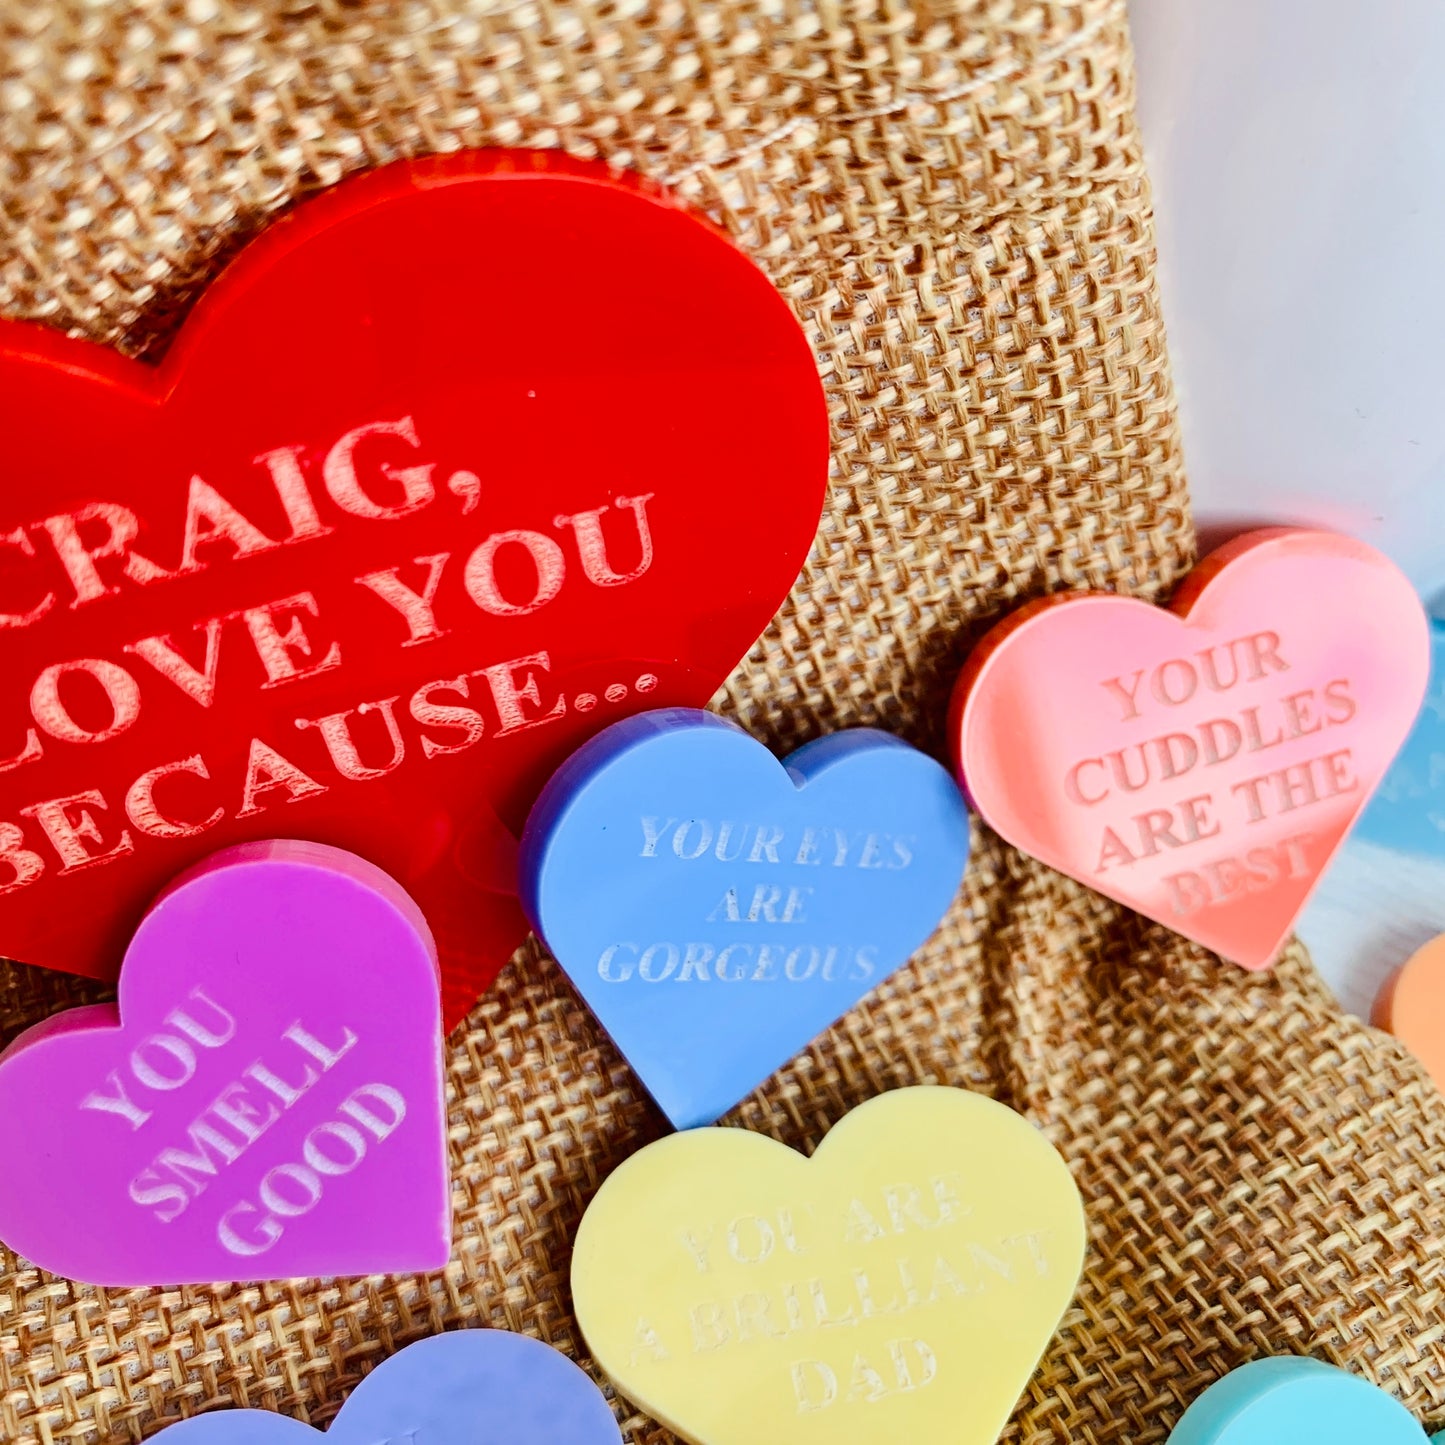 Personalised Ten Reasons I Love You Pastel Heart Tokens